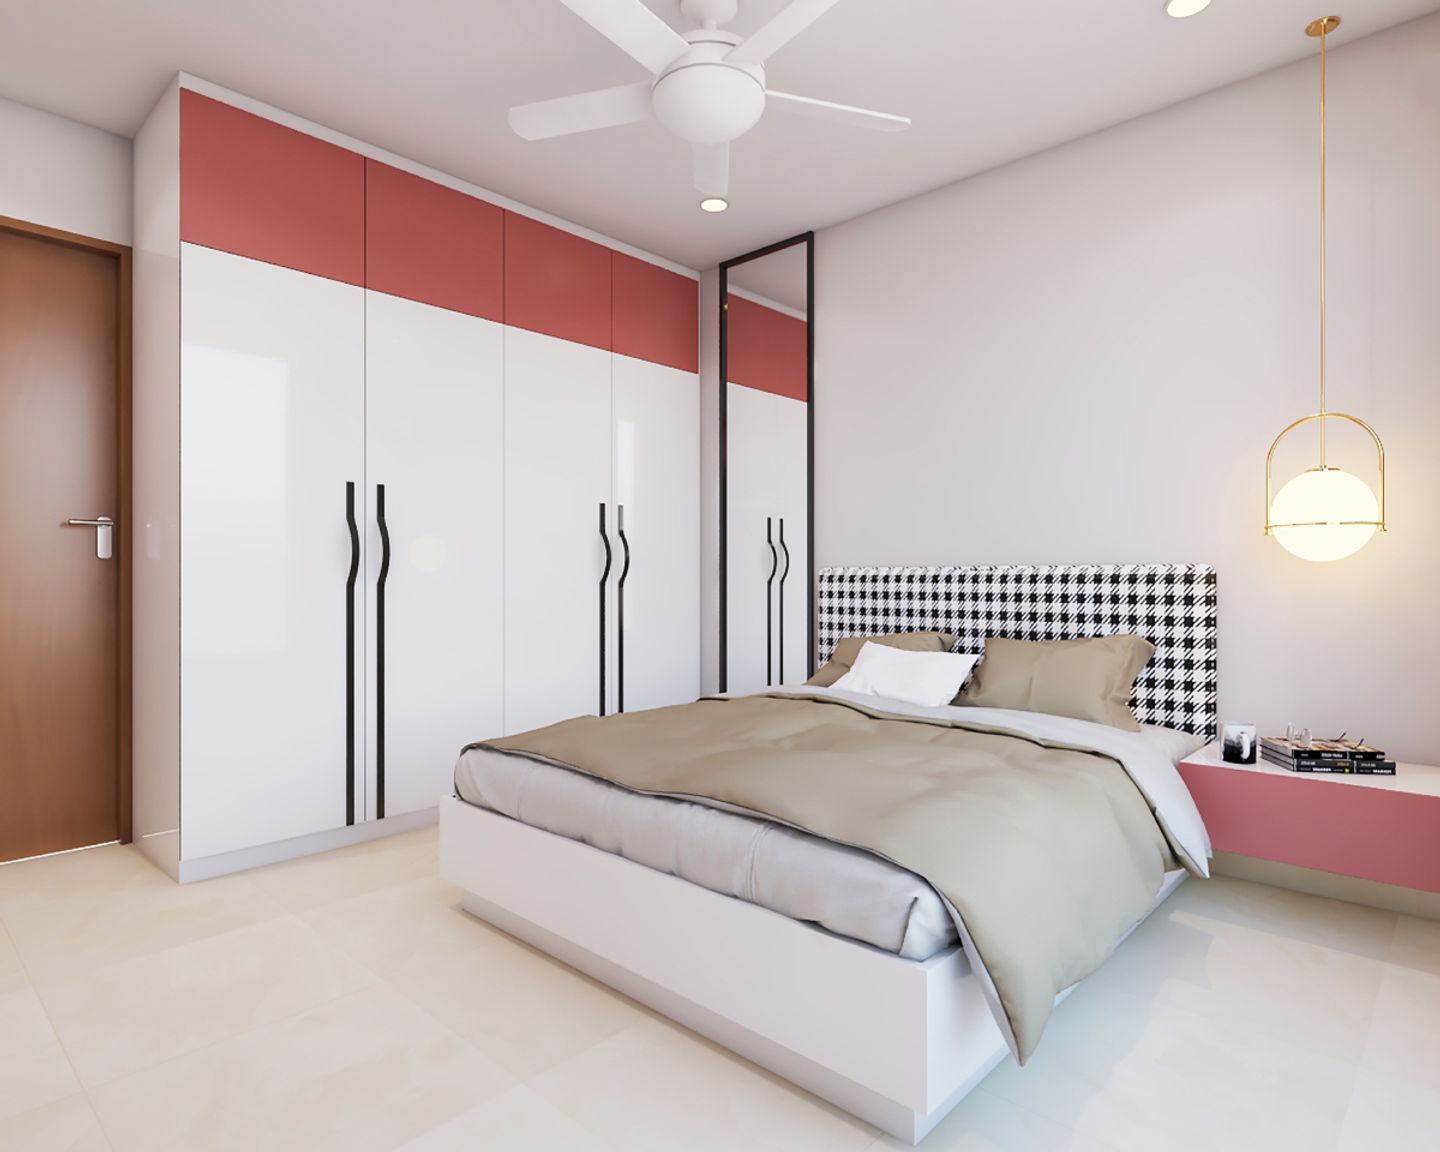 Modern Bedroom Tiles Design With A Glossy Finish